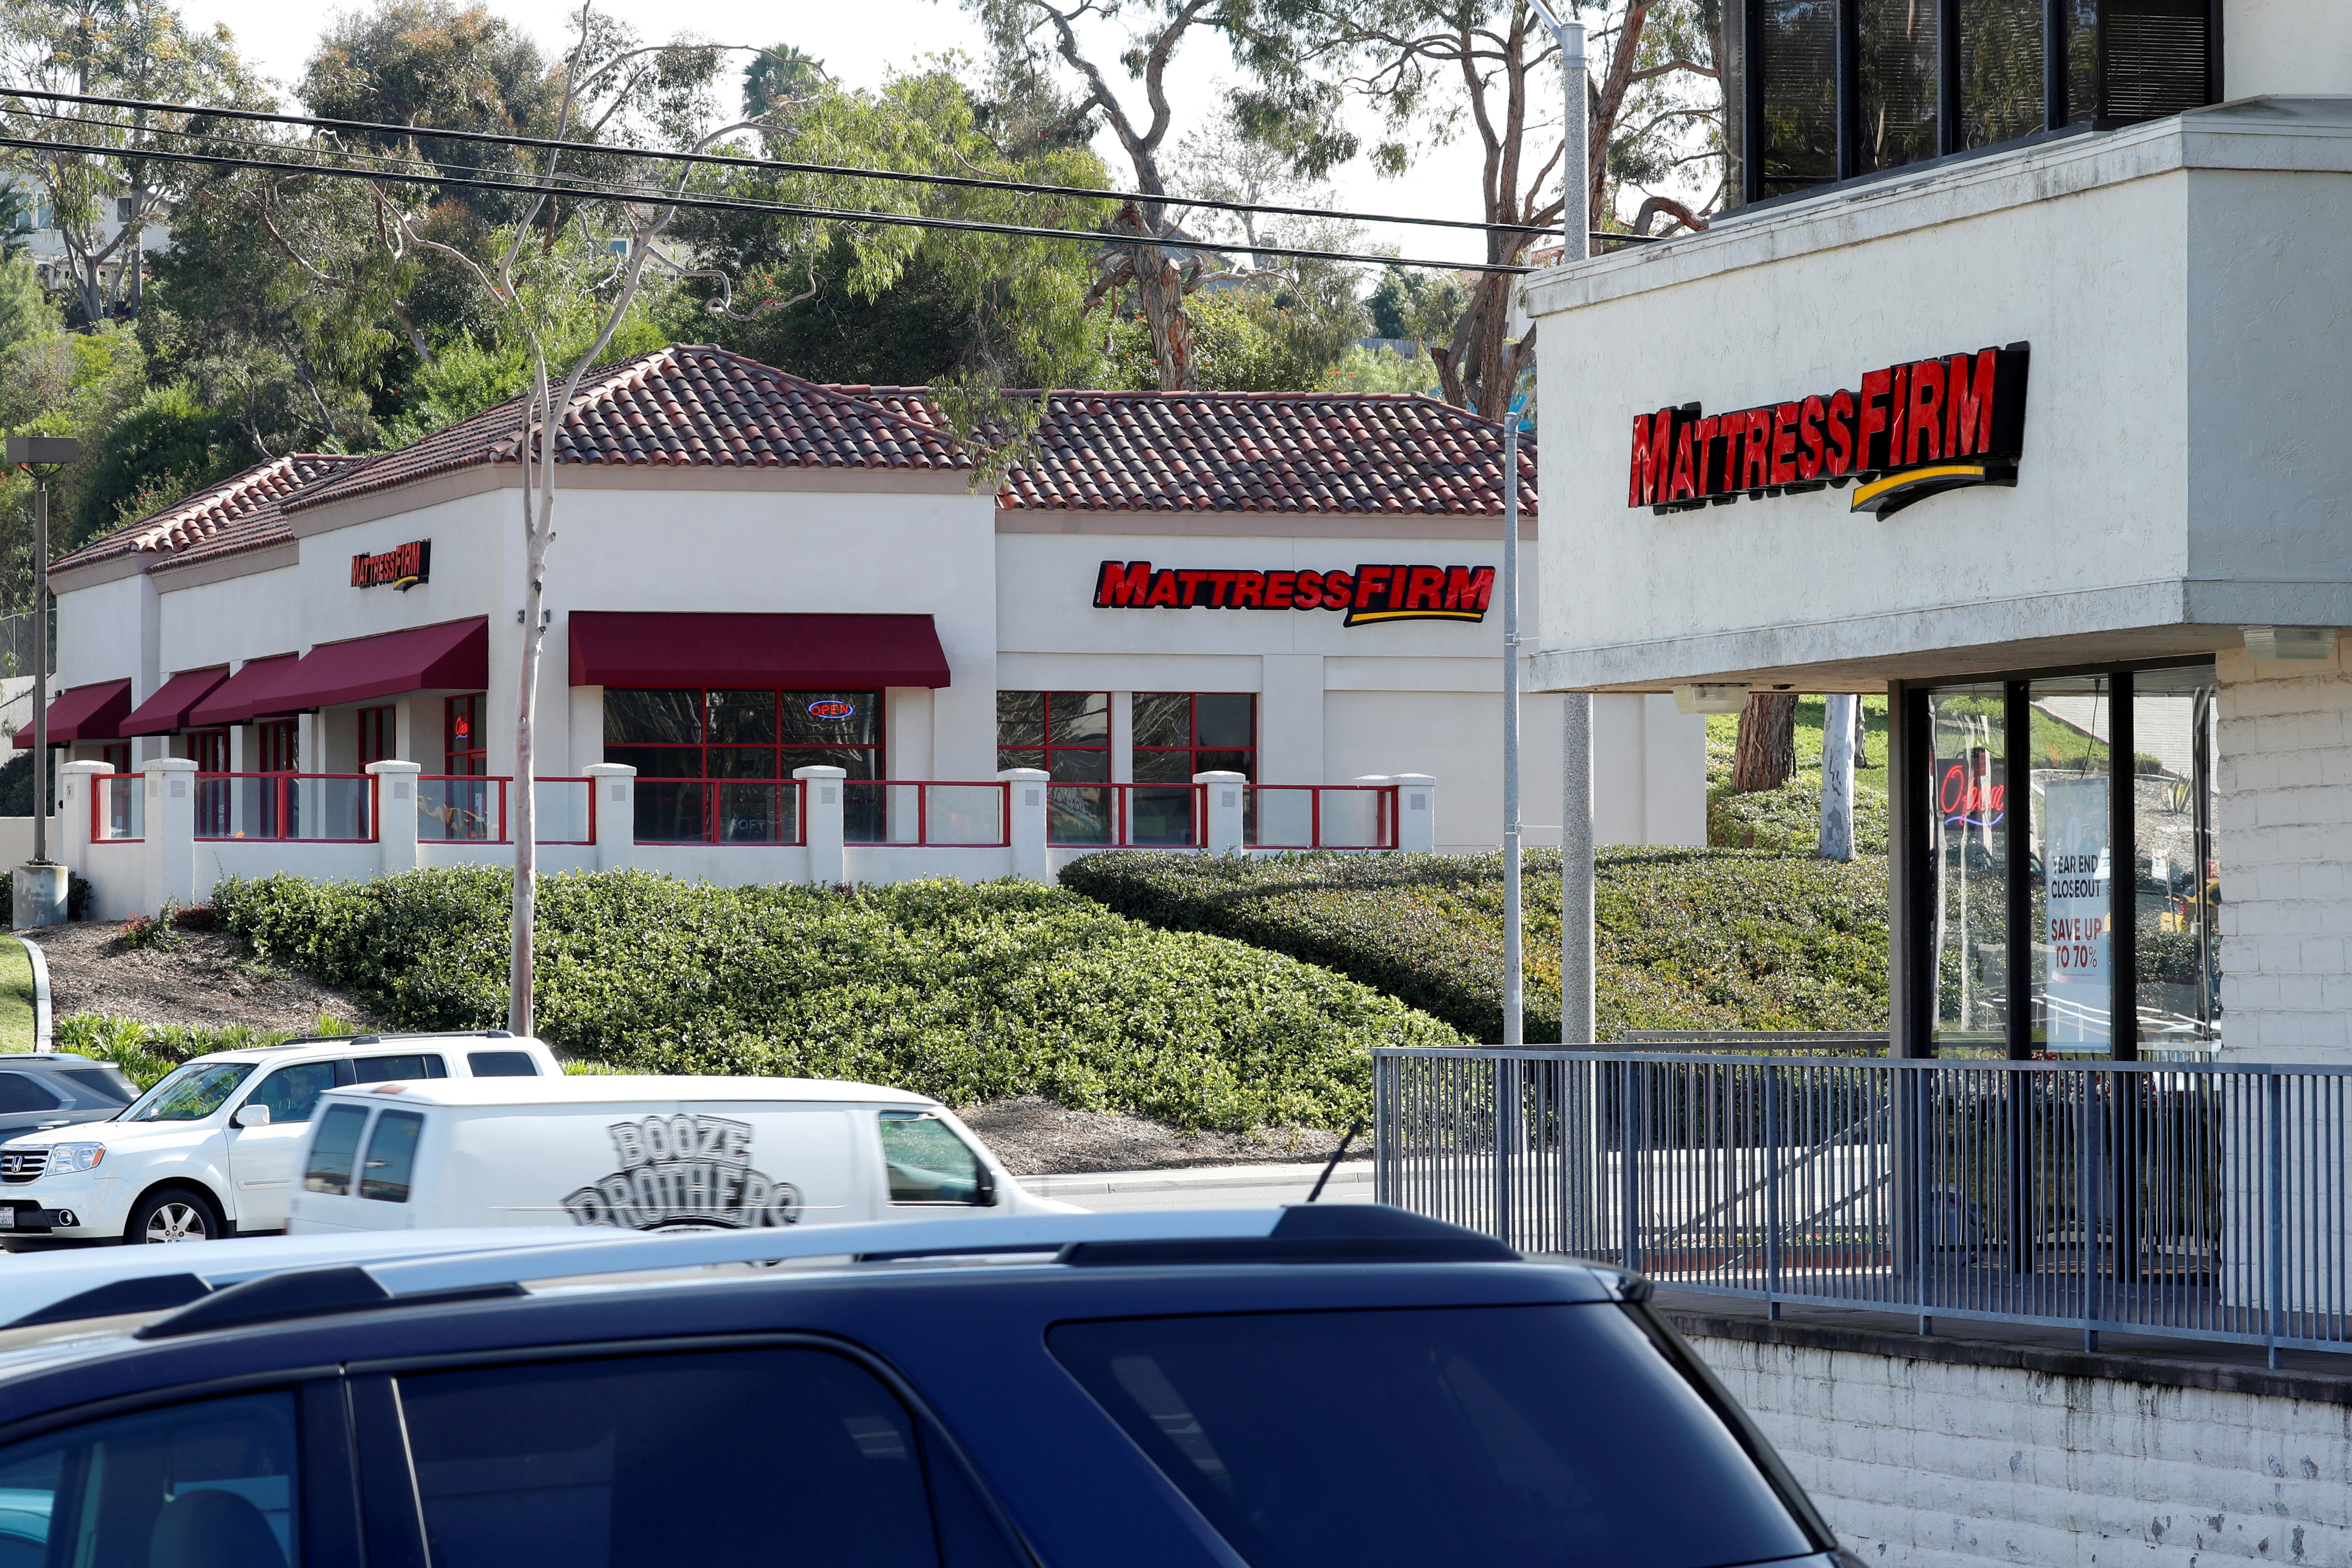 Two Mattress Firm stores are shown on either side of the street in Encinitas, California,